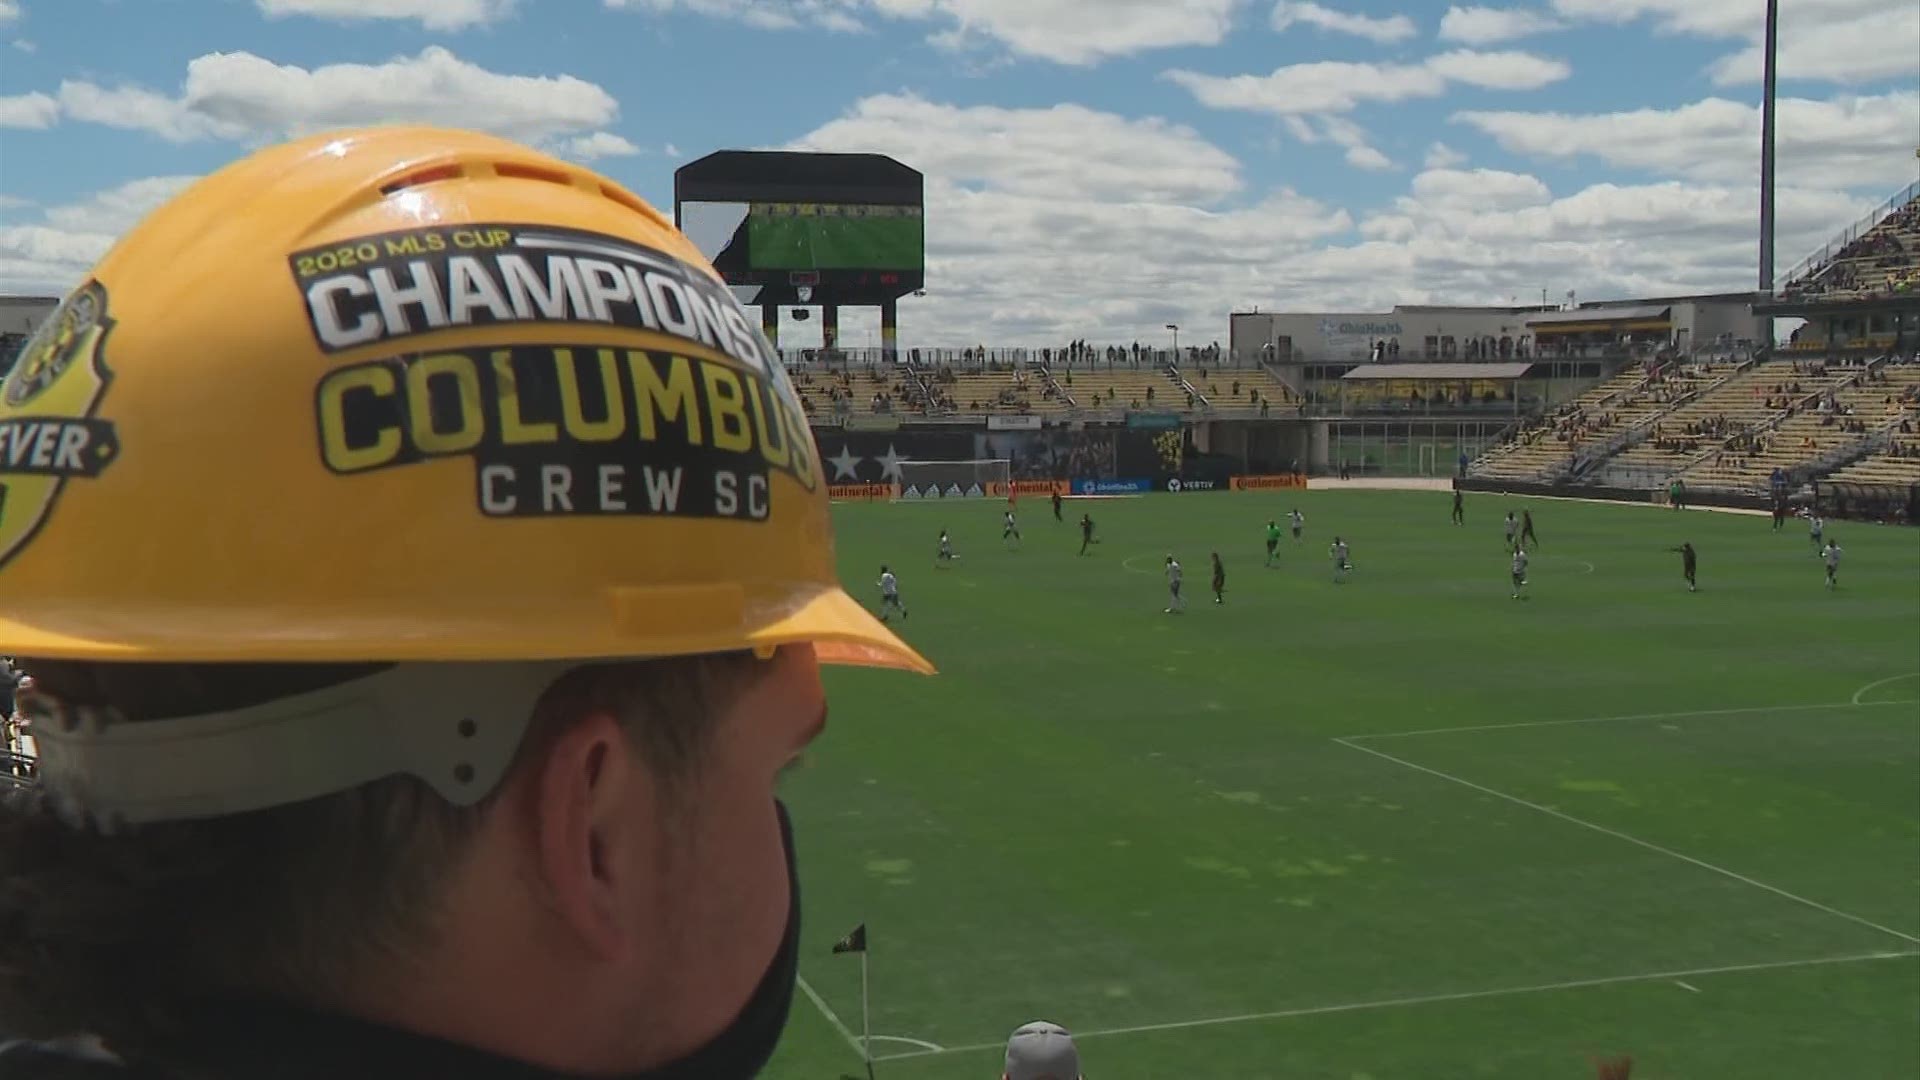 For the Nordecke, it's all about Glory to Columbus.